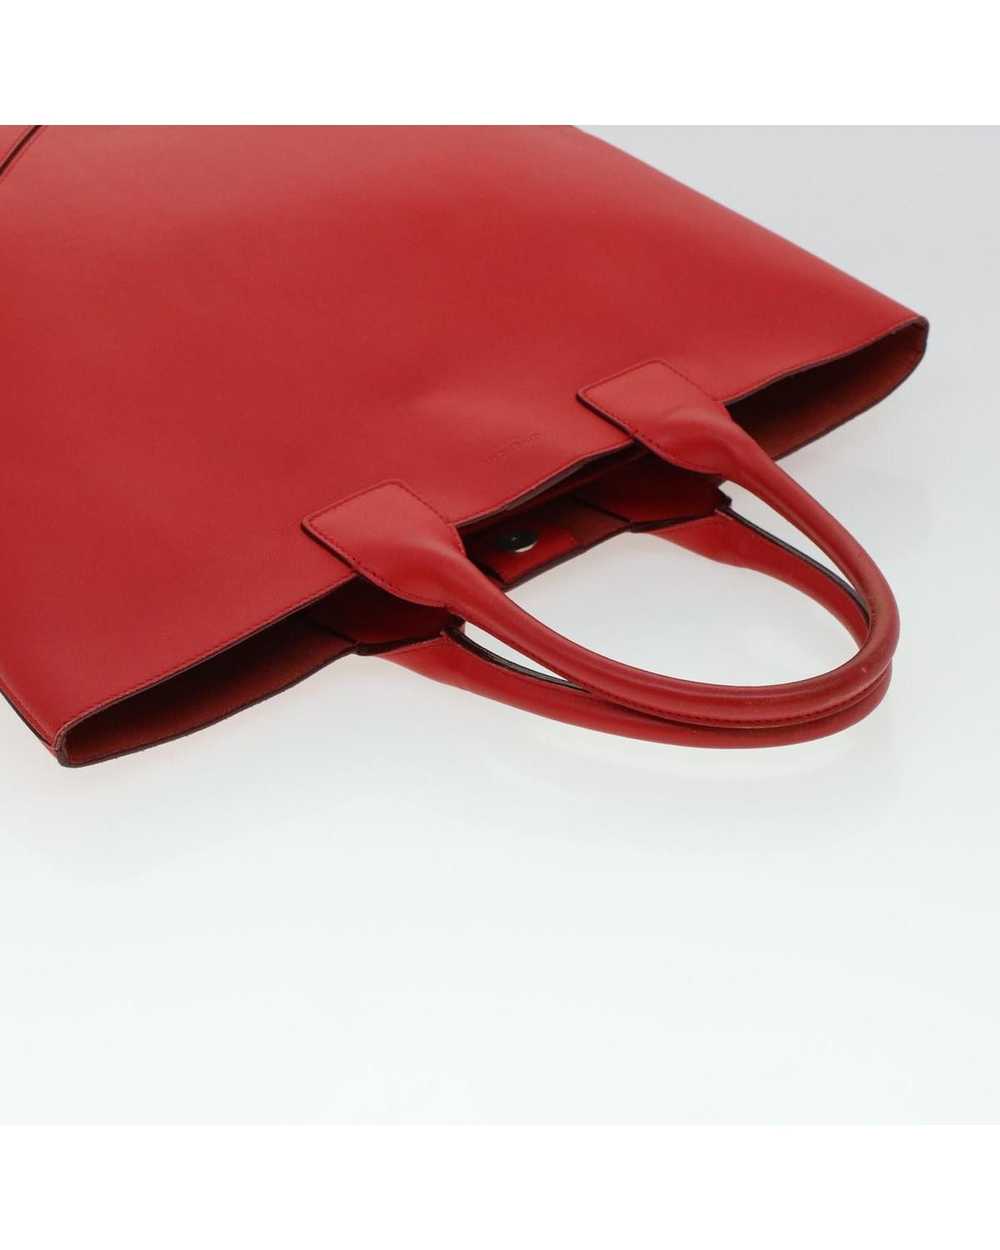 Givenchy Practical and Elegant Givenchy Red Leath… - image 7